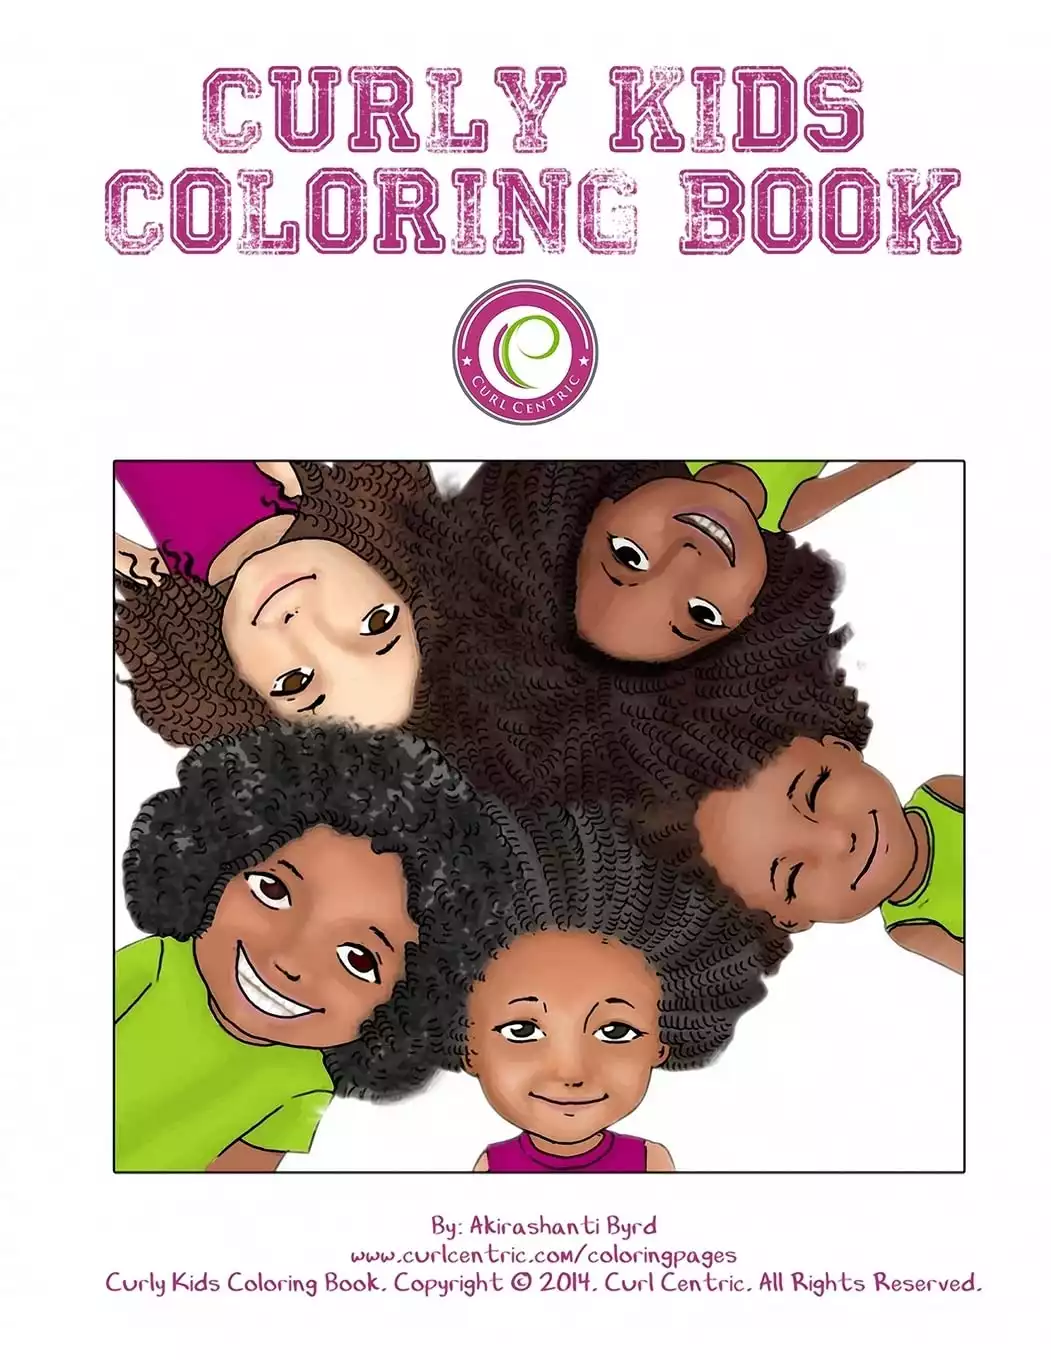 Curly kids coloring book